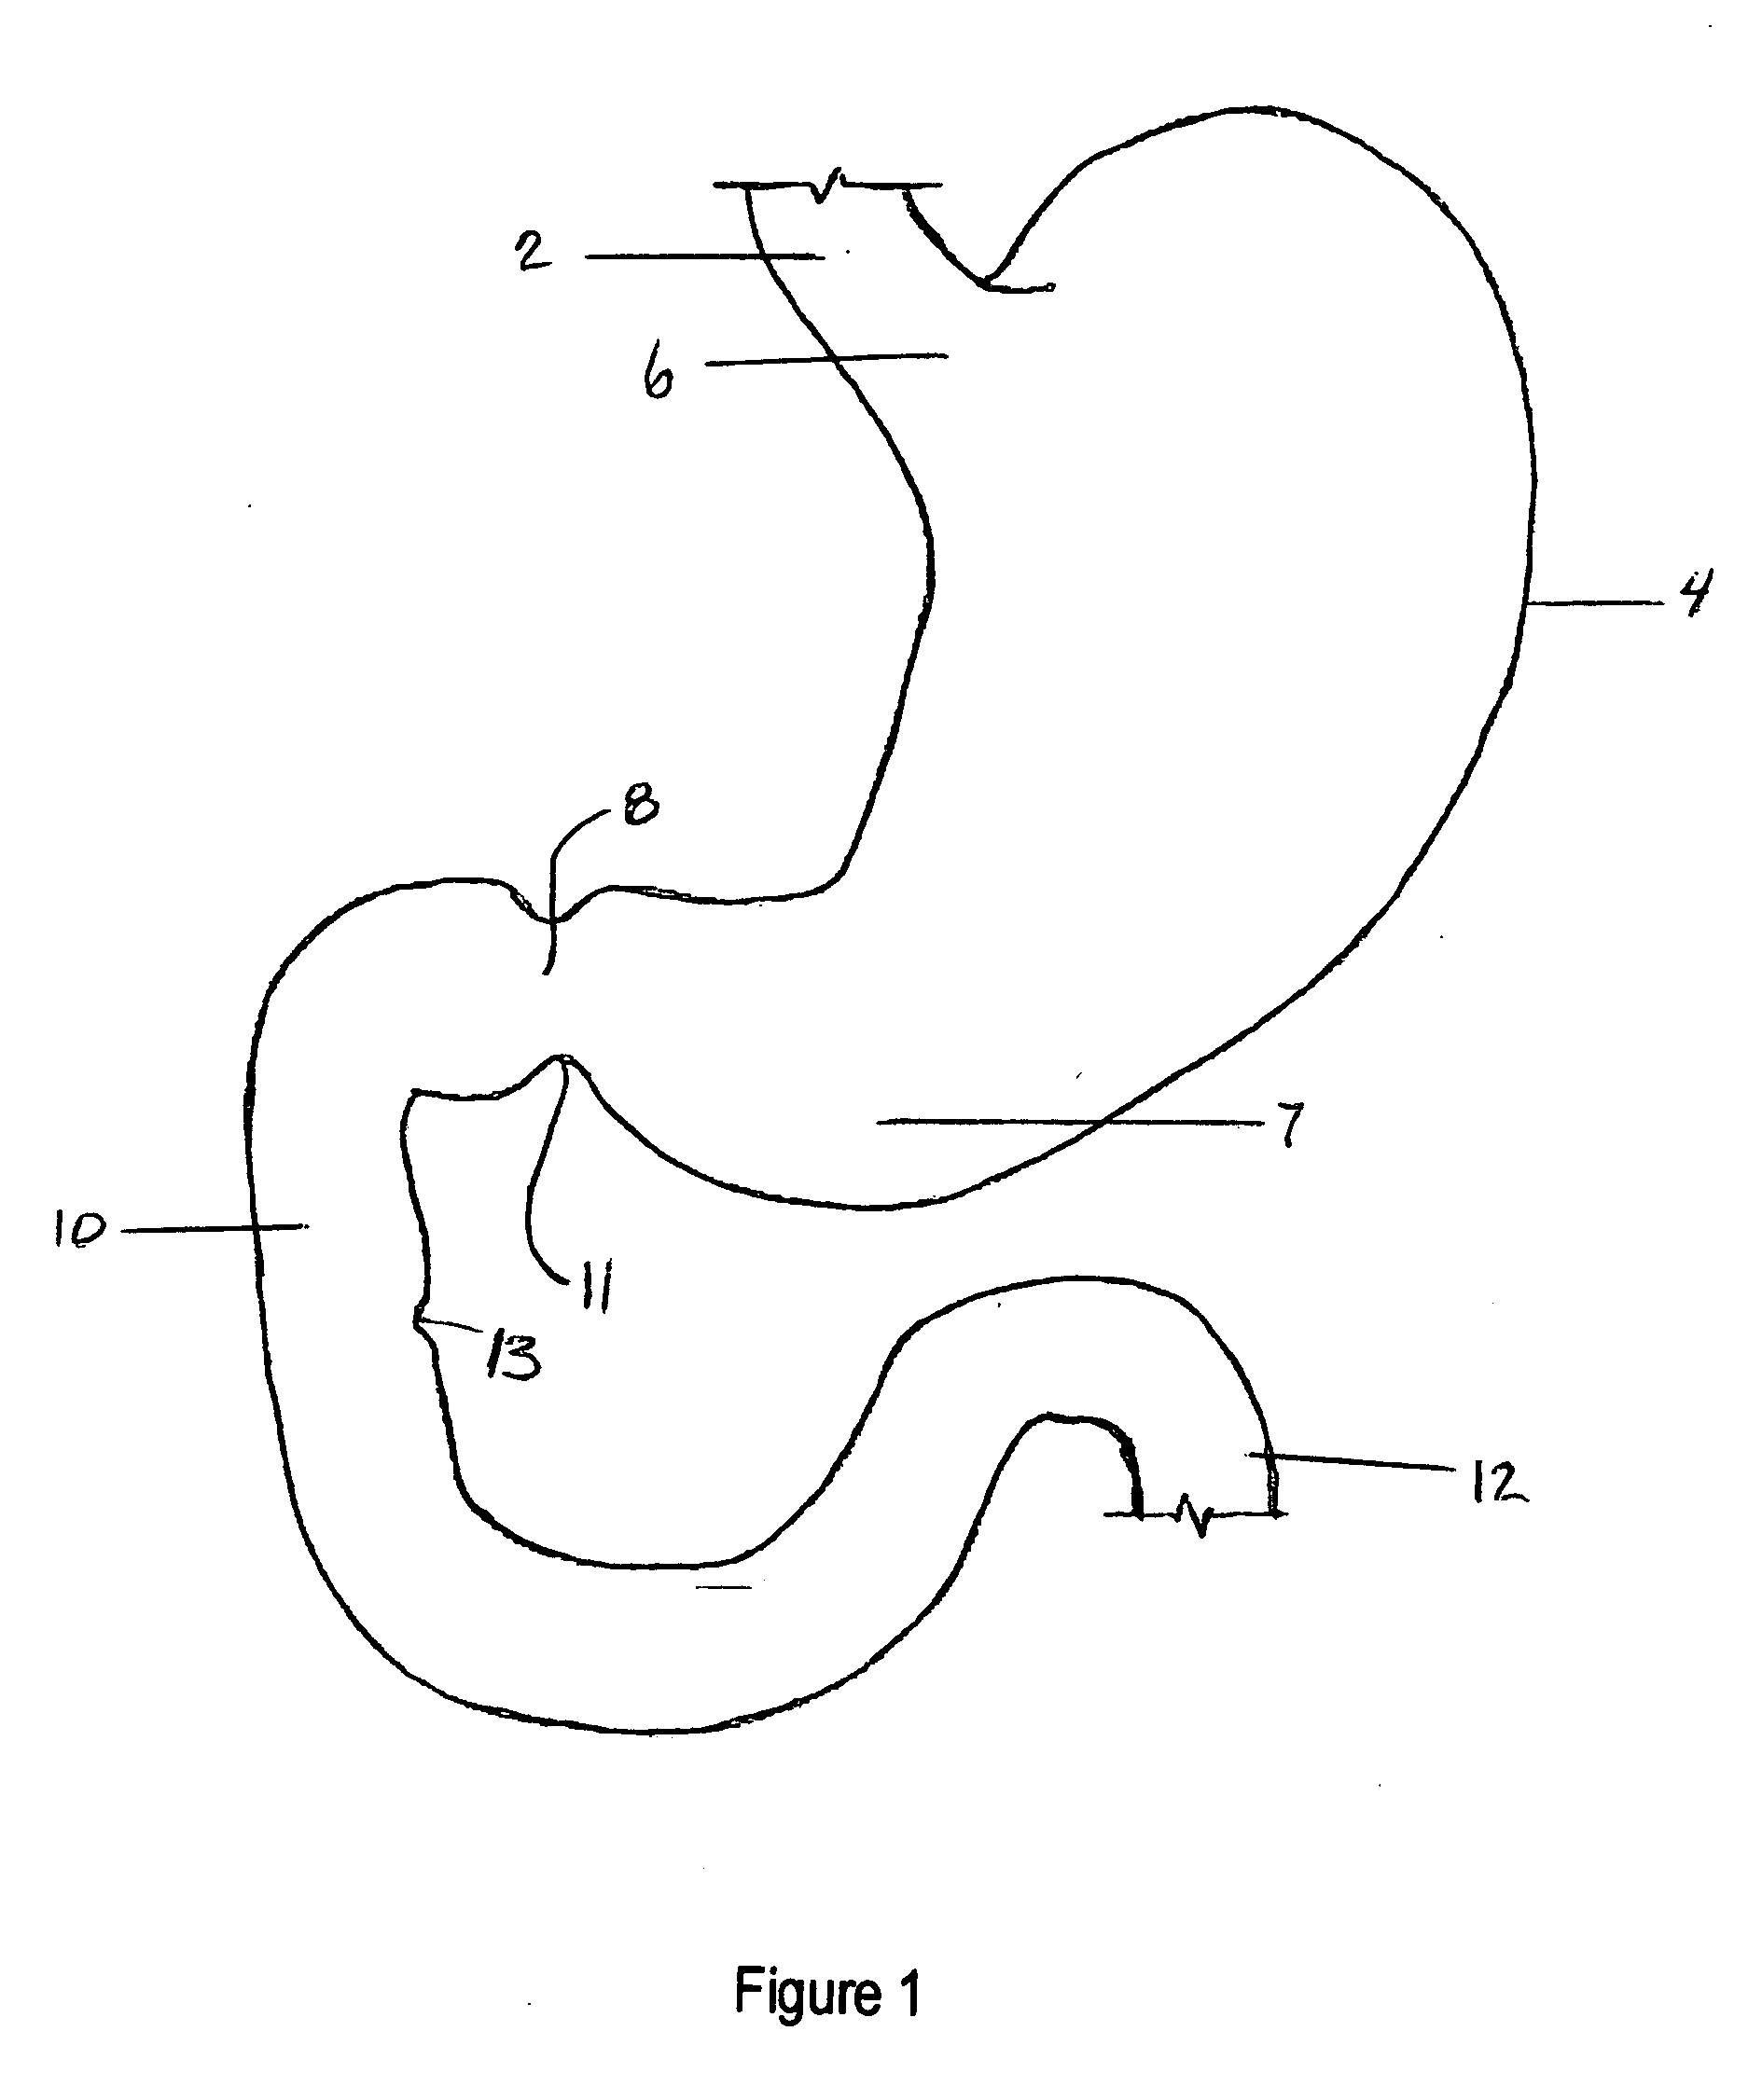 Method and apparatus for reducing obesity